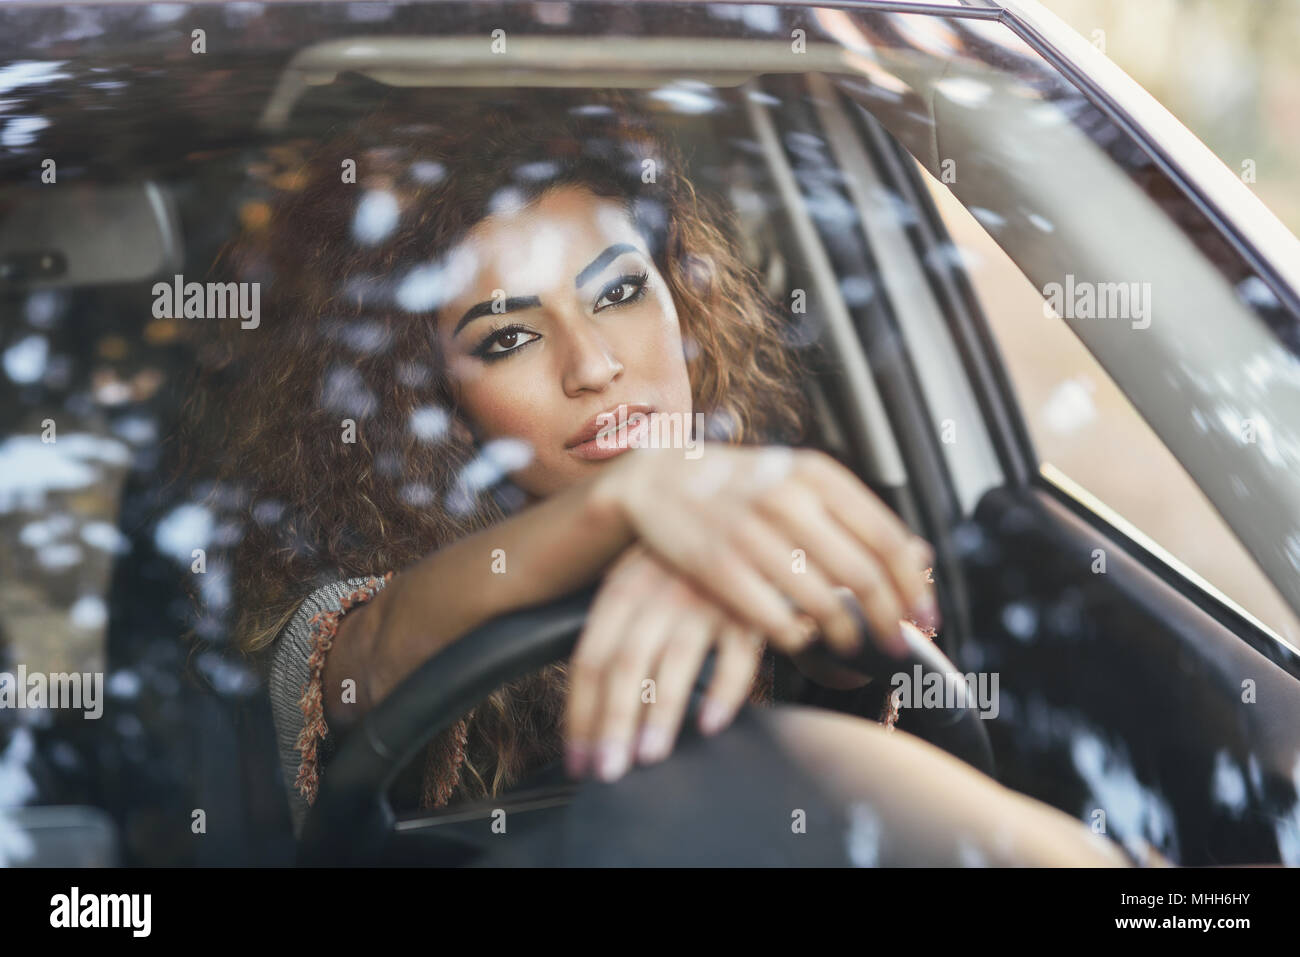 Beautiful young arabic woman inside a nice white car looking through the window. Arab girl wearing casual clothes. Stock Photo